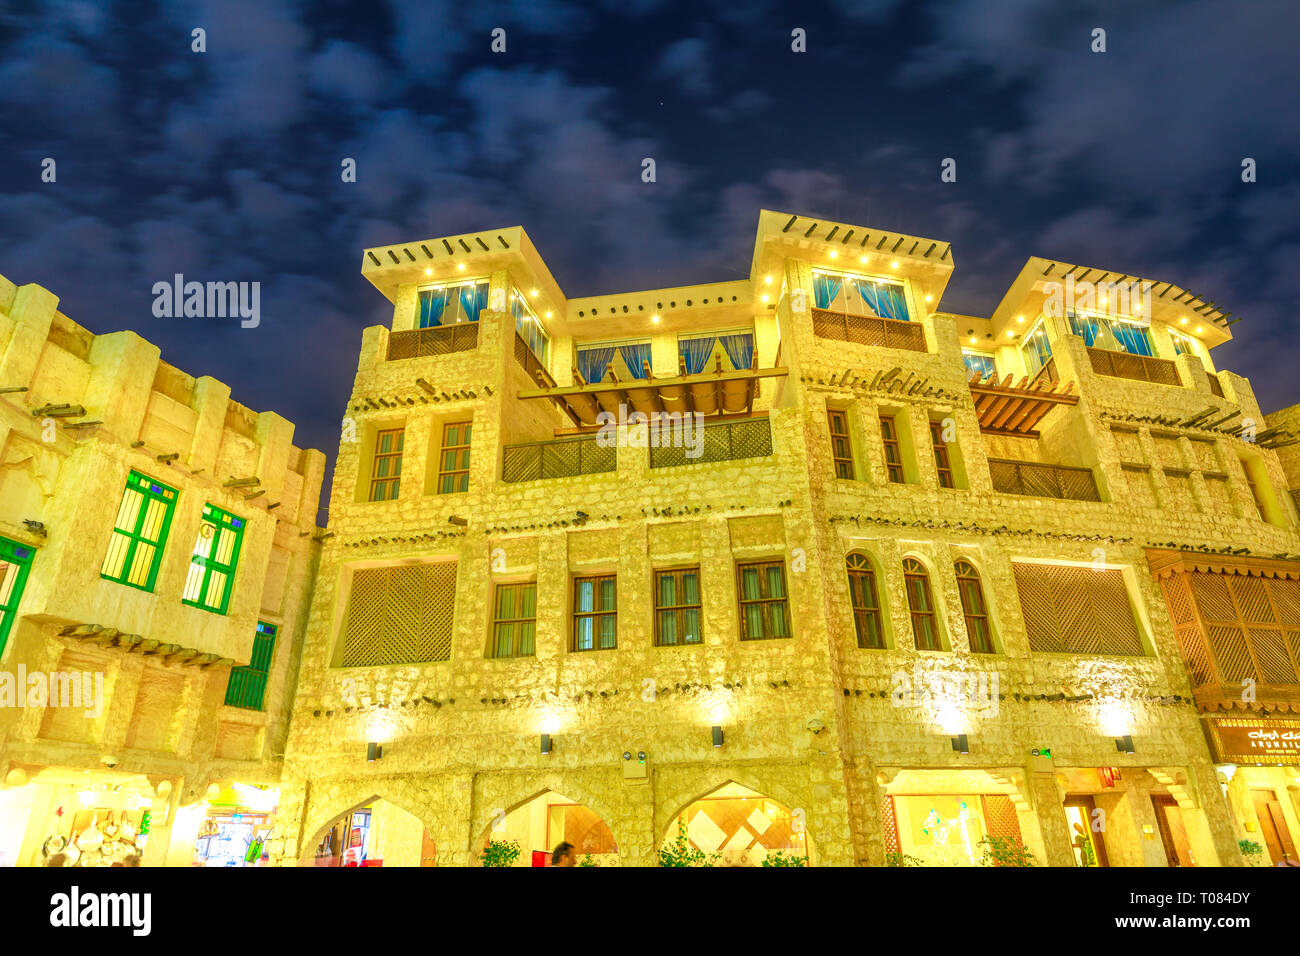 Doha, Qatar - February 18, 2019: historic building at Souq Waqif, old market in traditional Qatari architectural style at night. The souq is Stock Photo